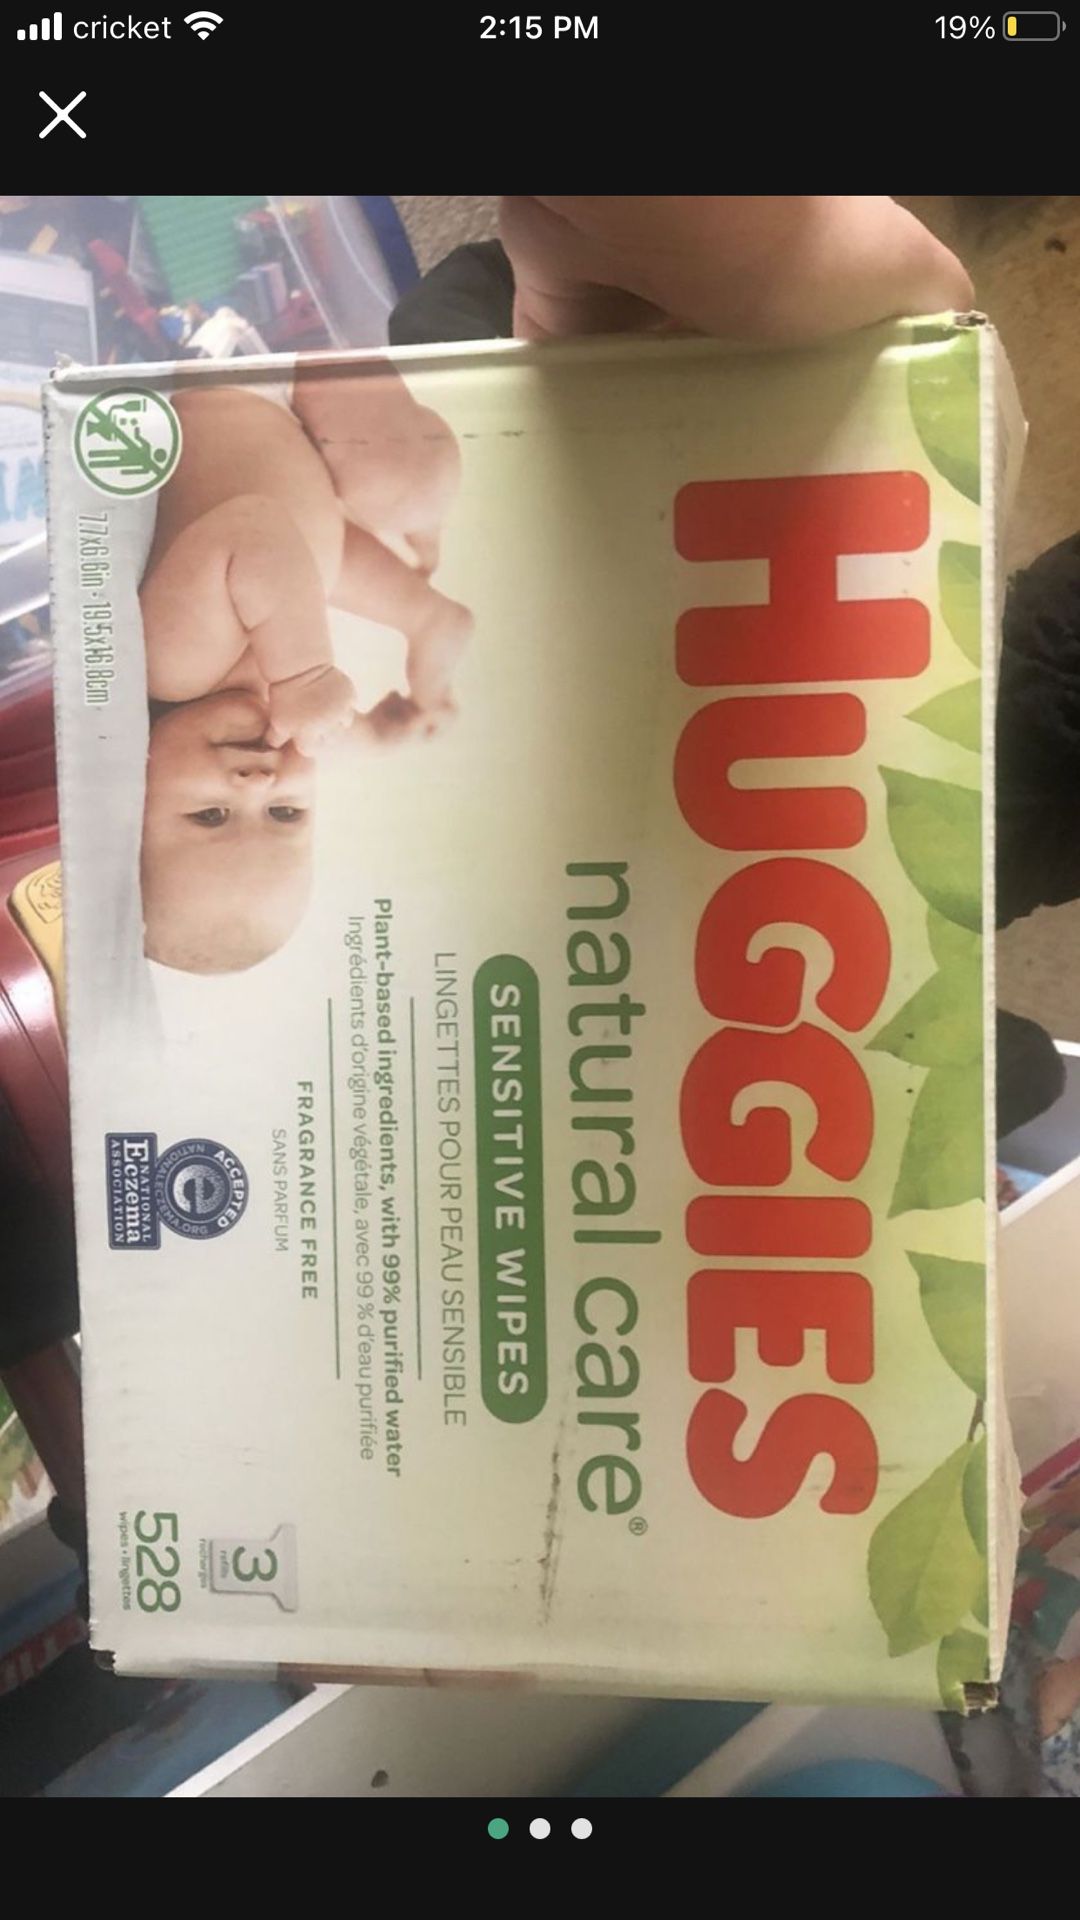 Diapers And Wipes